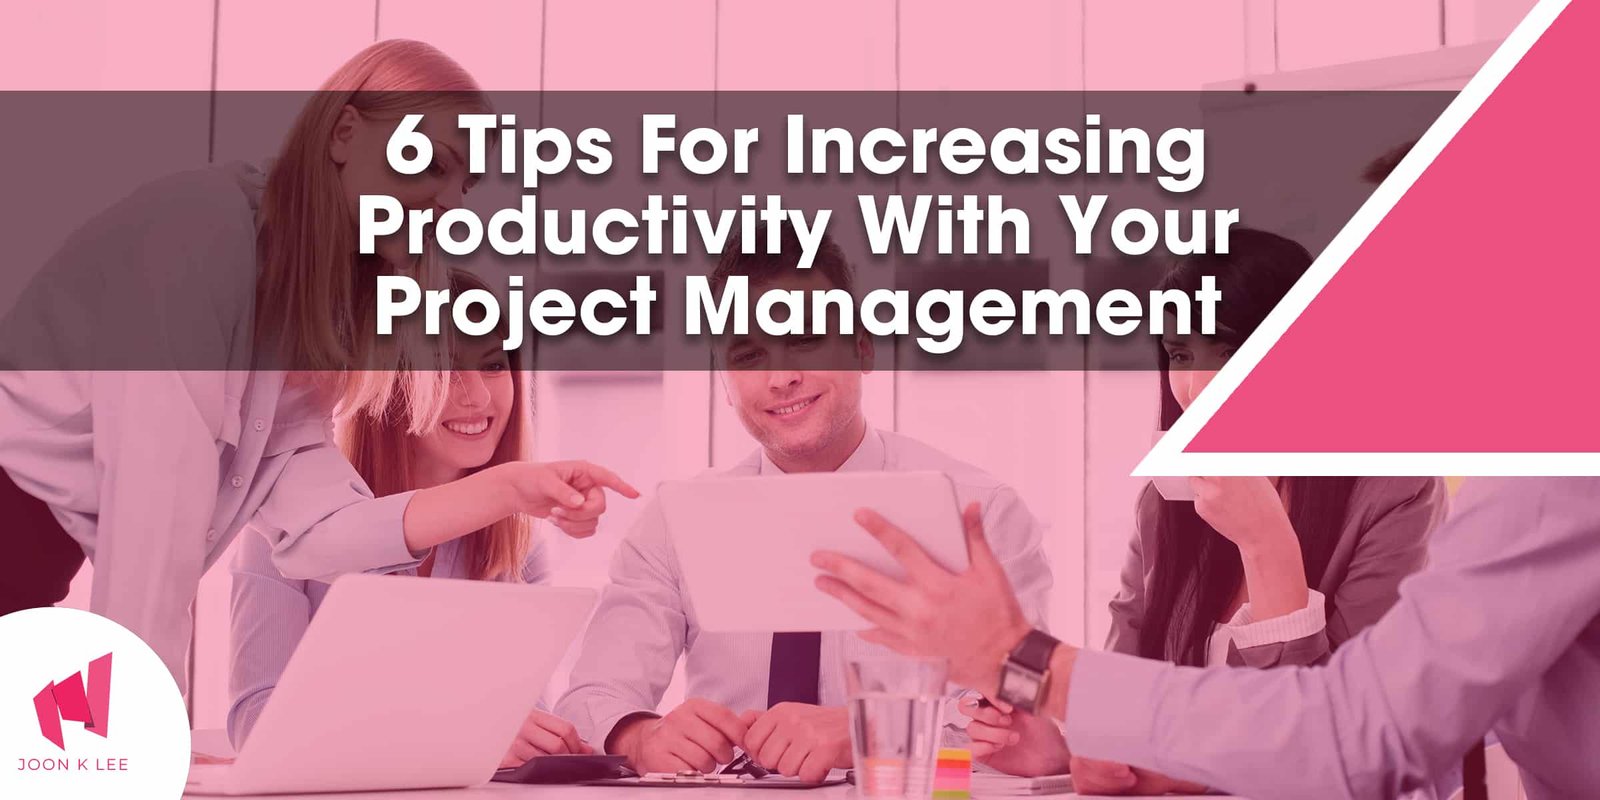 6 Tips For Increasing Productivity With Your Project Management